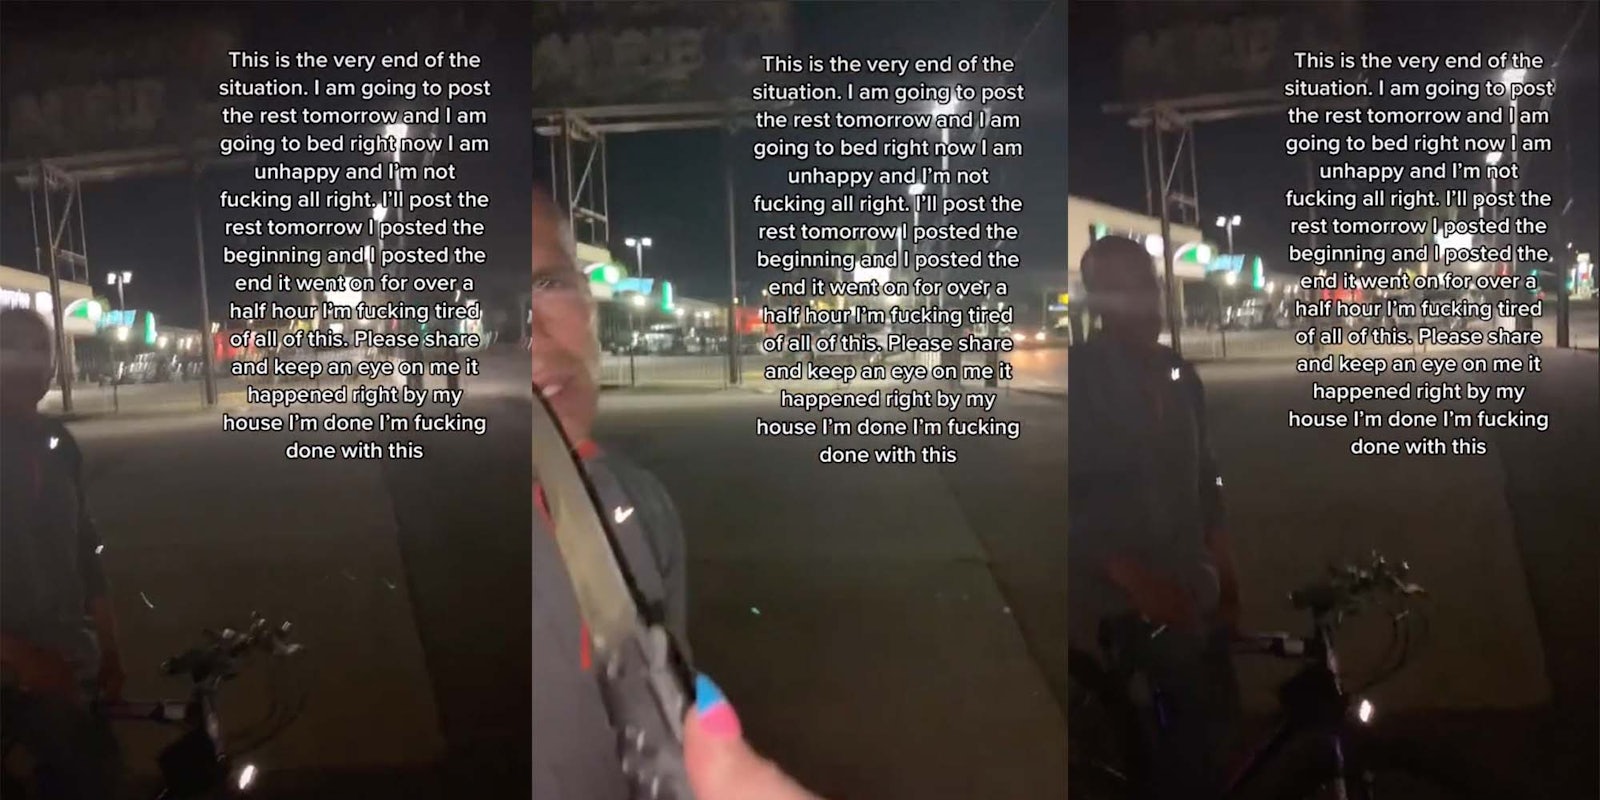 TikTok user @MissyMythic recorded her interaction with a man who she said had been following her. She threatened him with a knife.